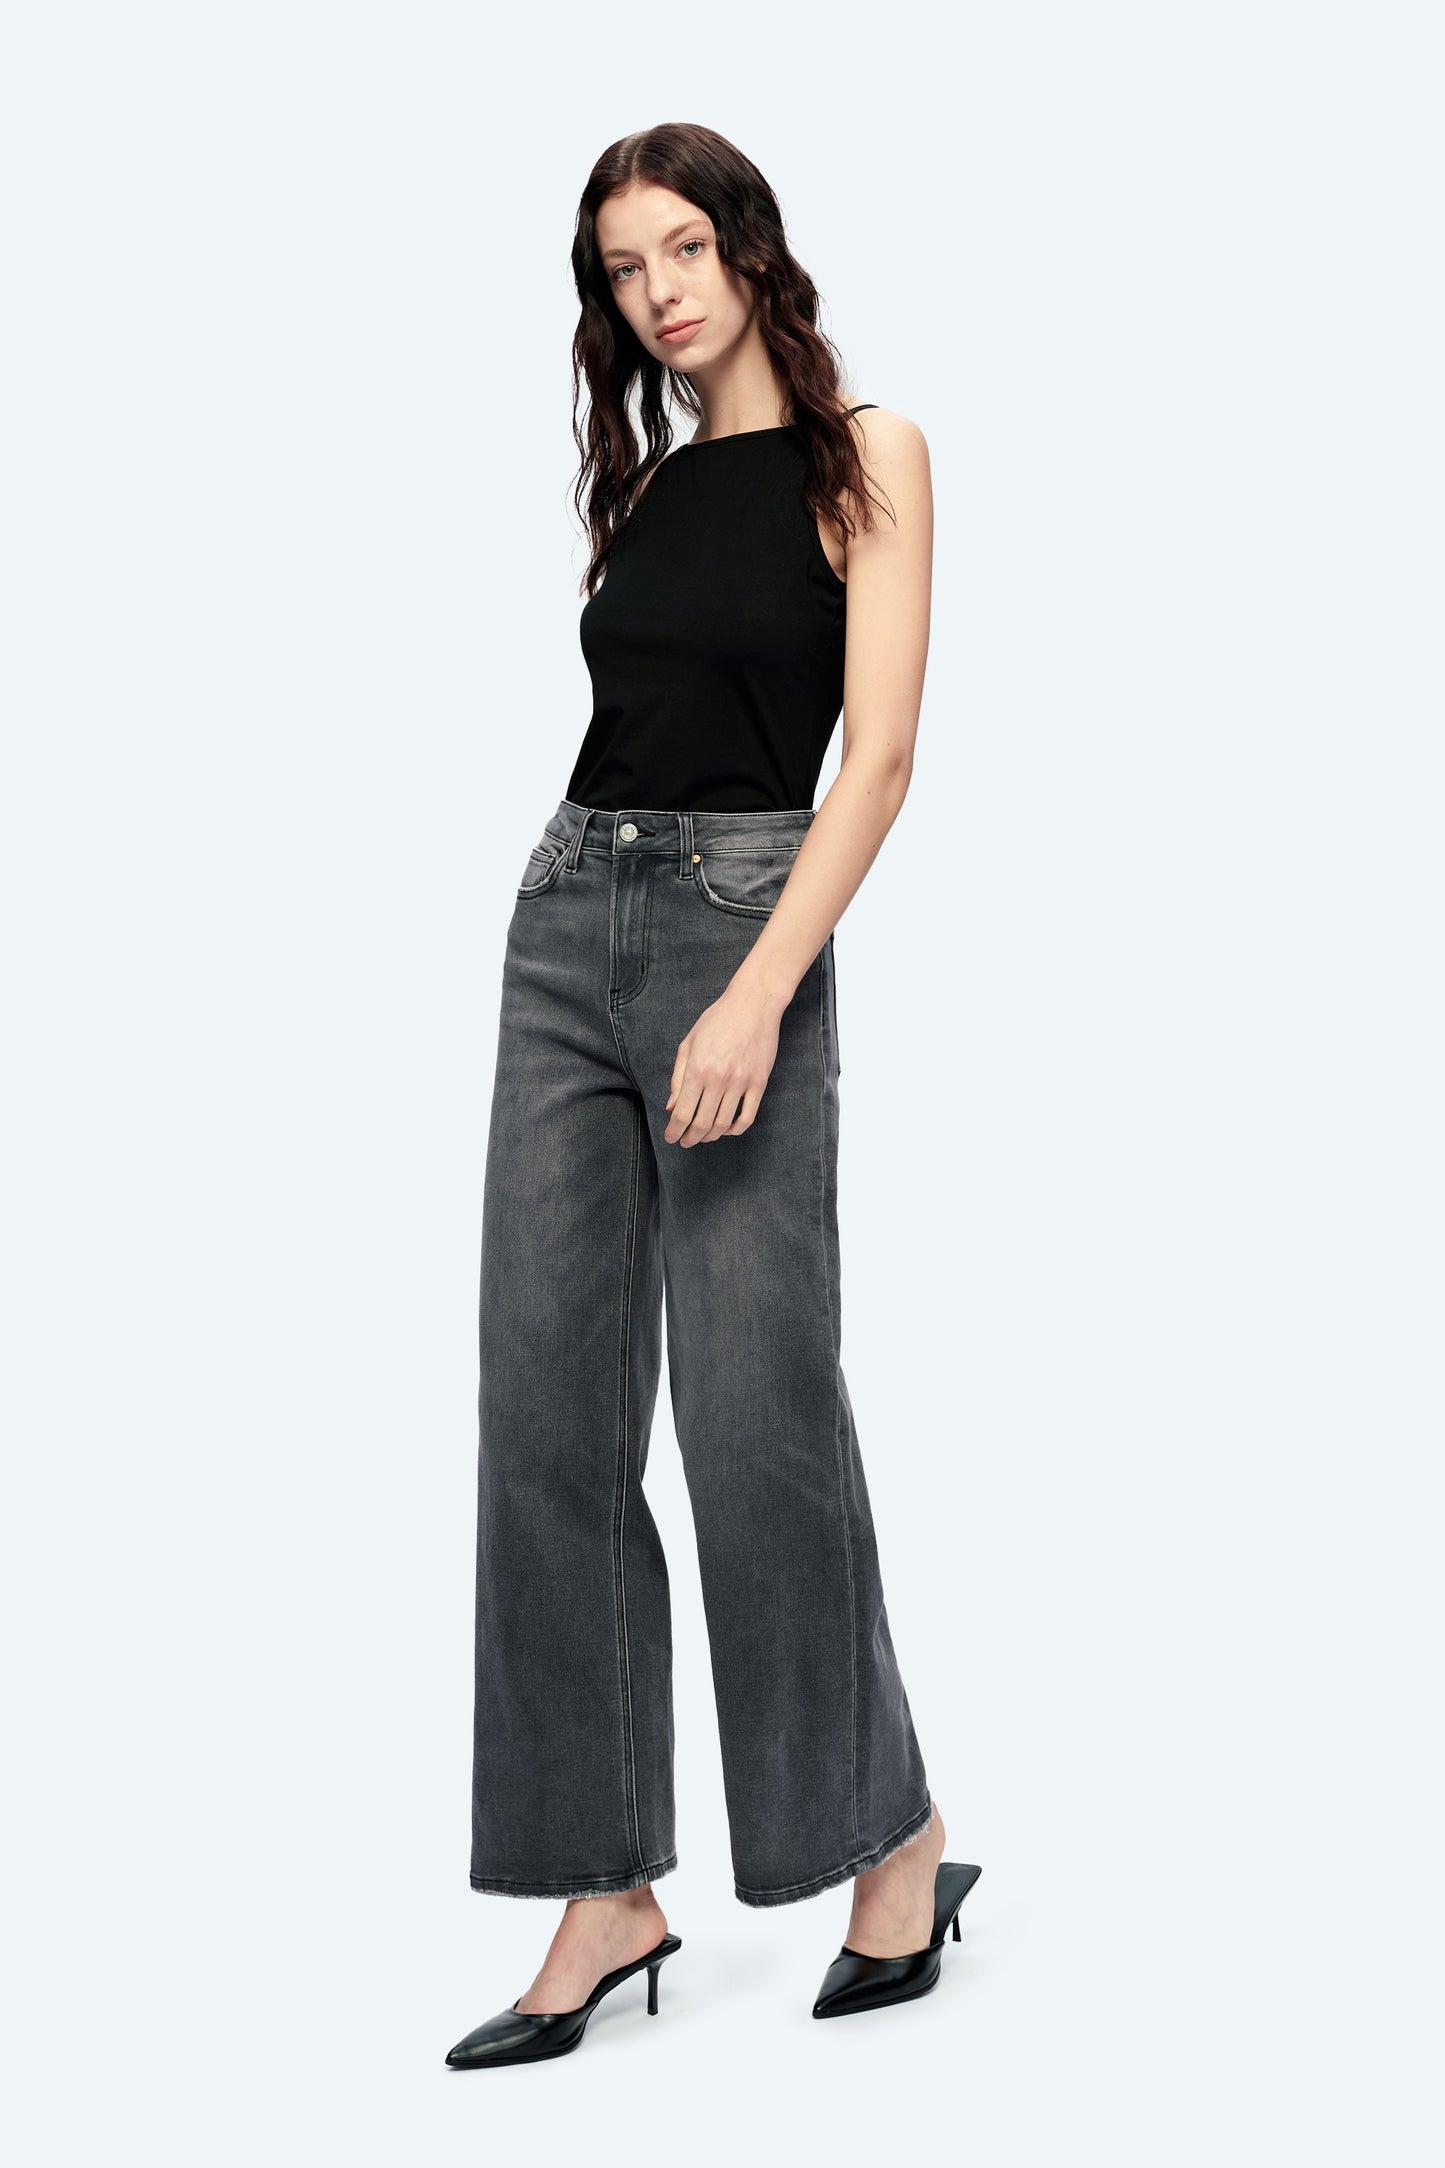 JUDY HIGH RISE WIDE LEG JEANS BYW8143 (BYHE168) CHARCOAL